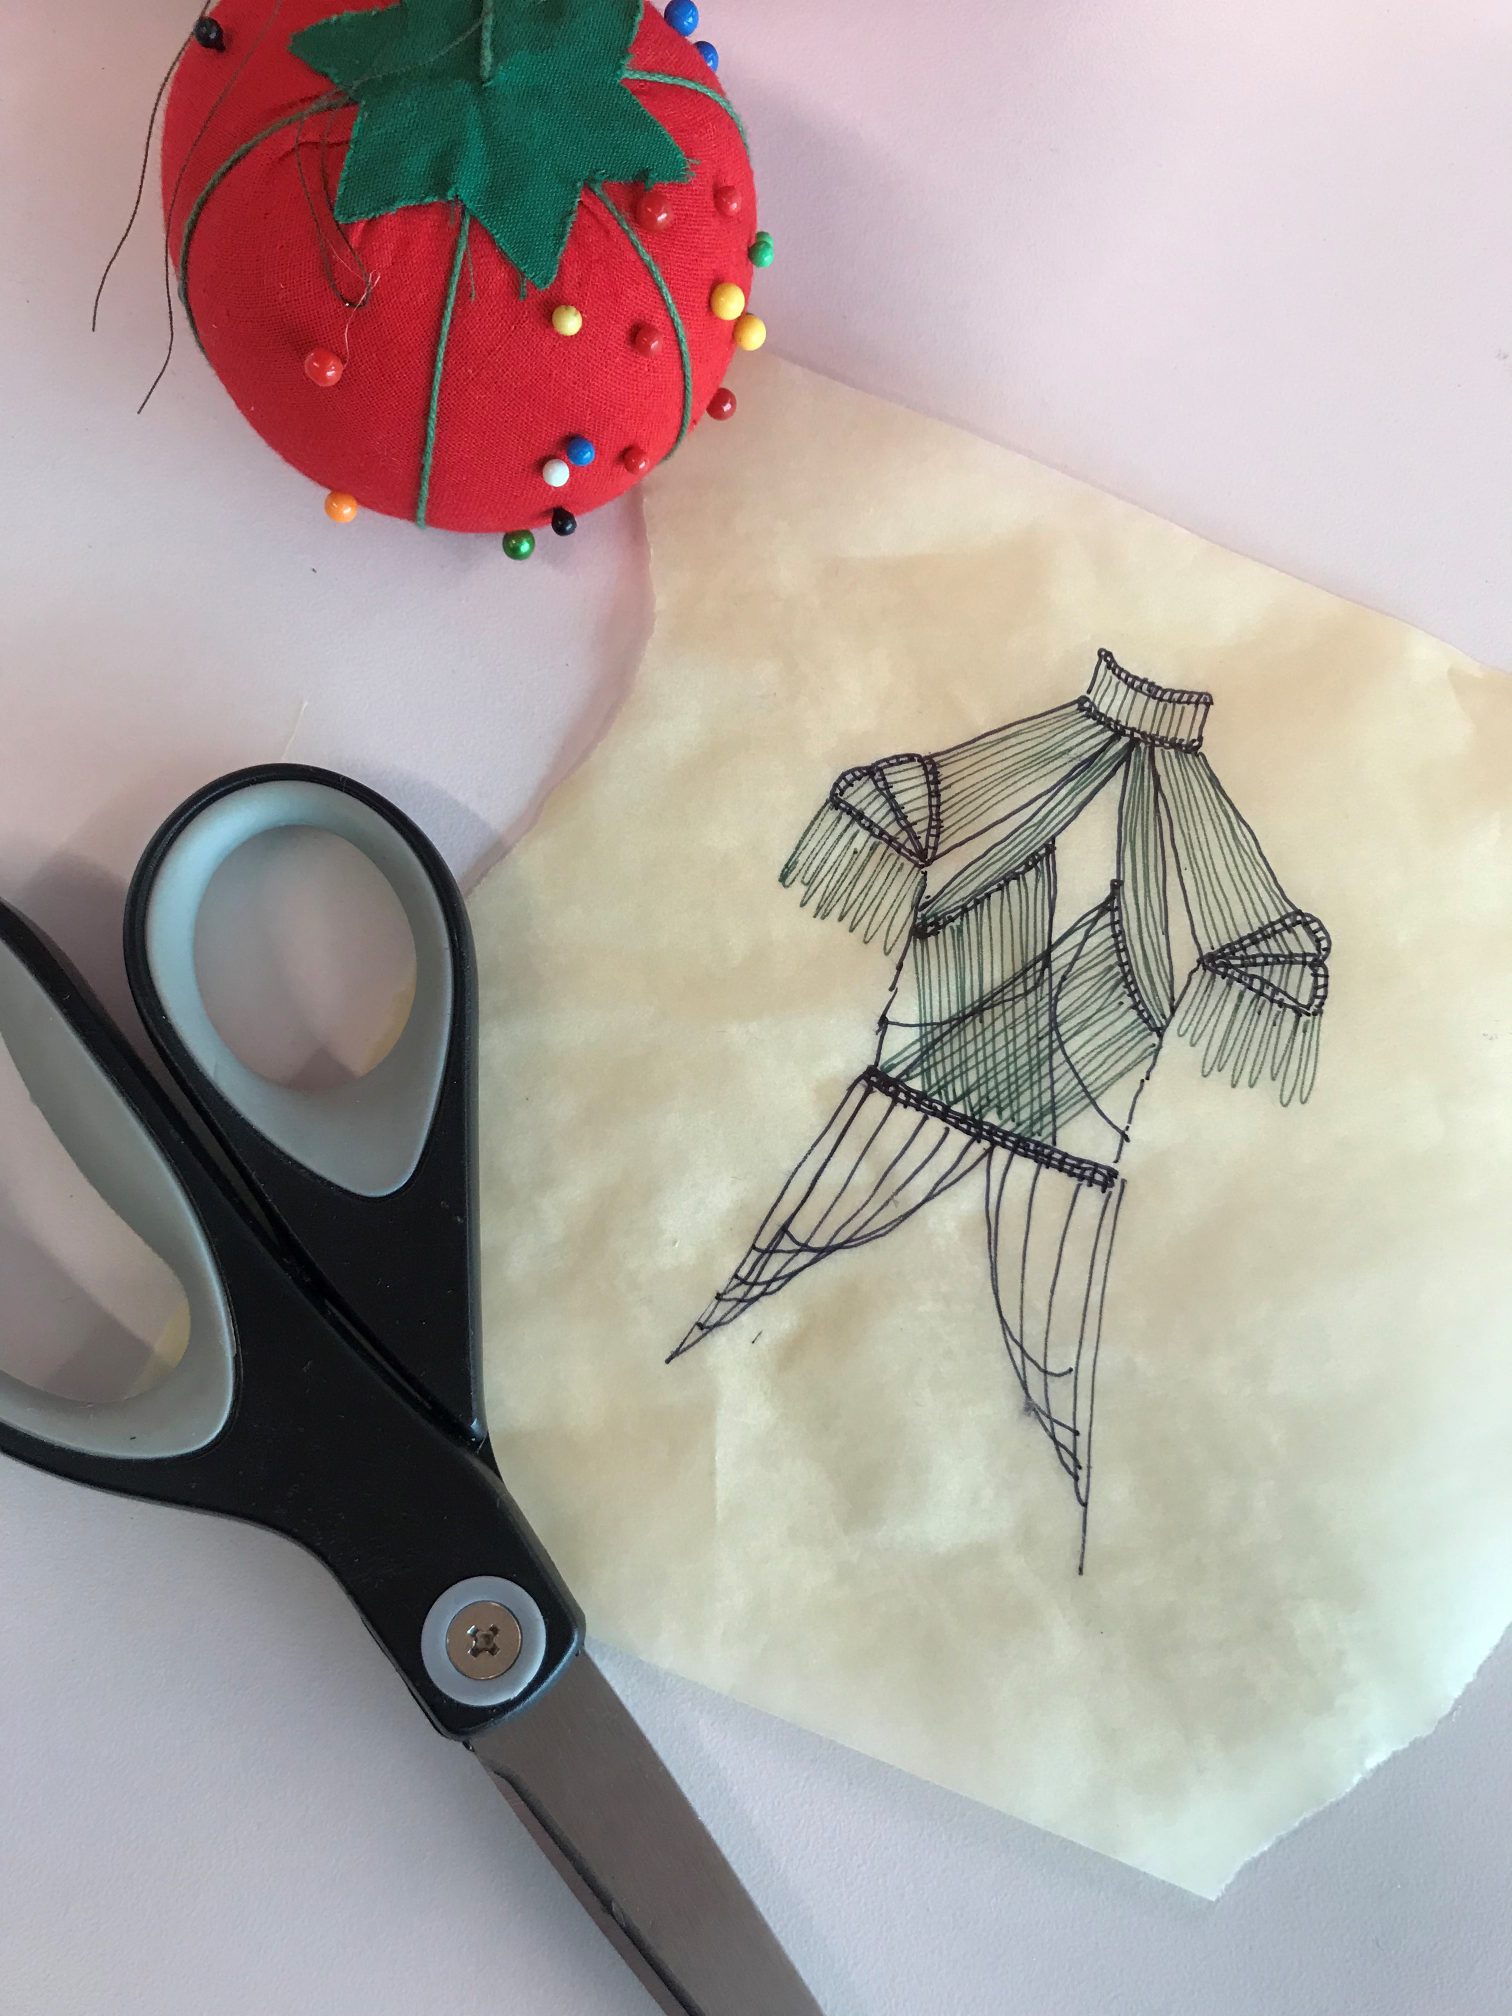 Fashion drawing of shirt next to scissors and red pin cushion